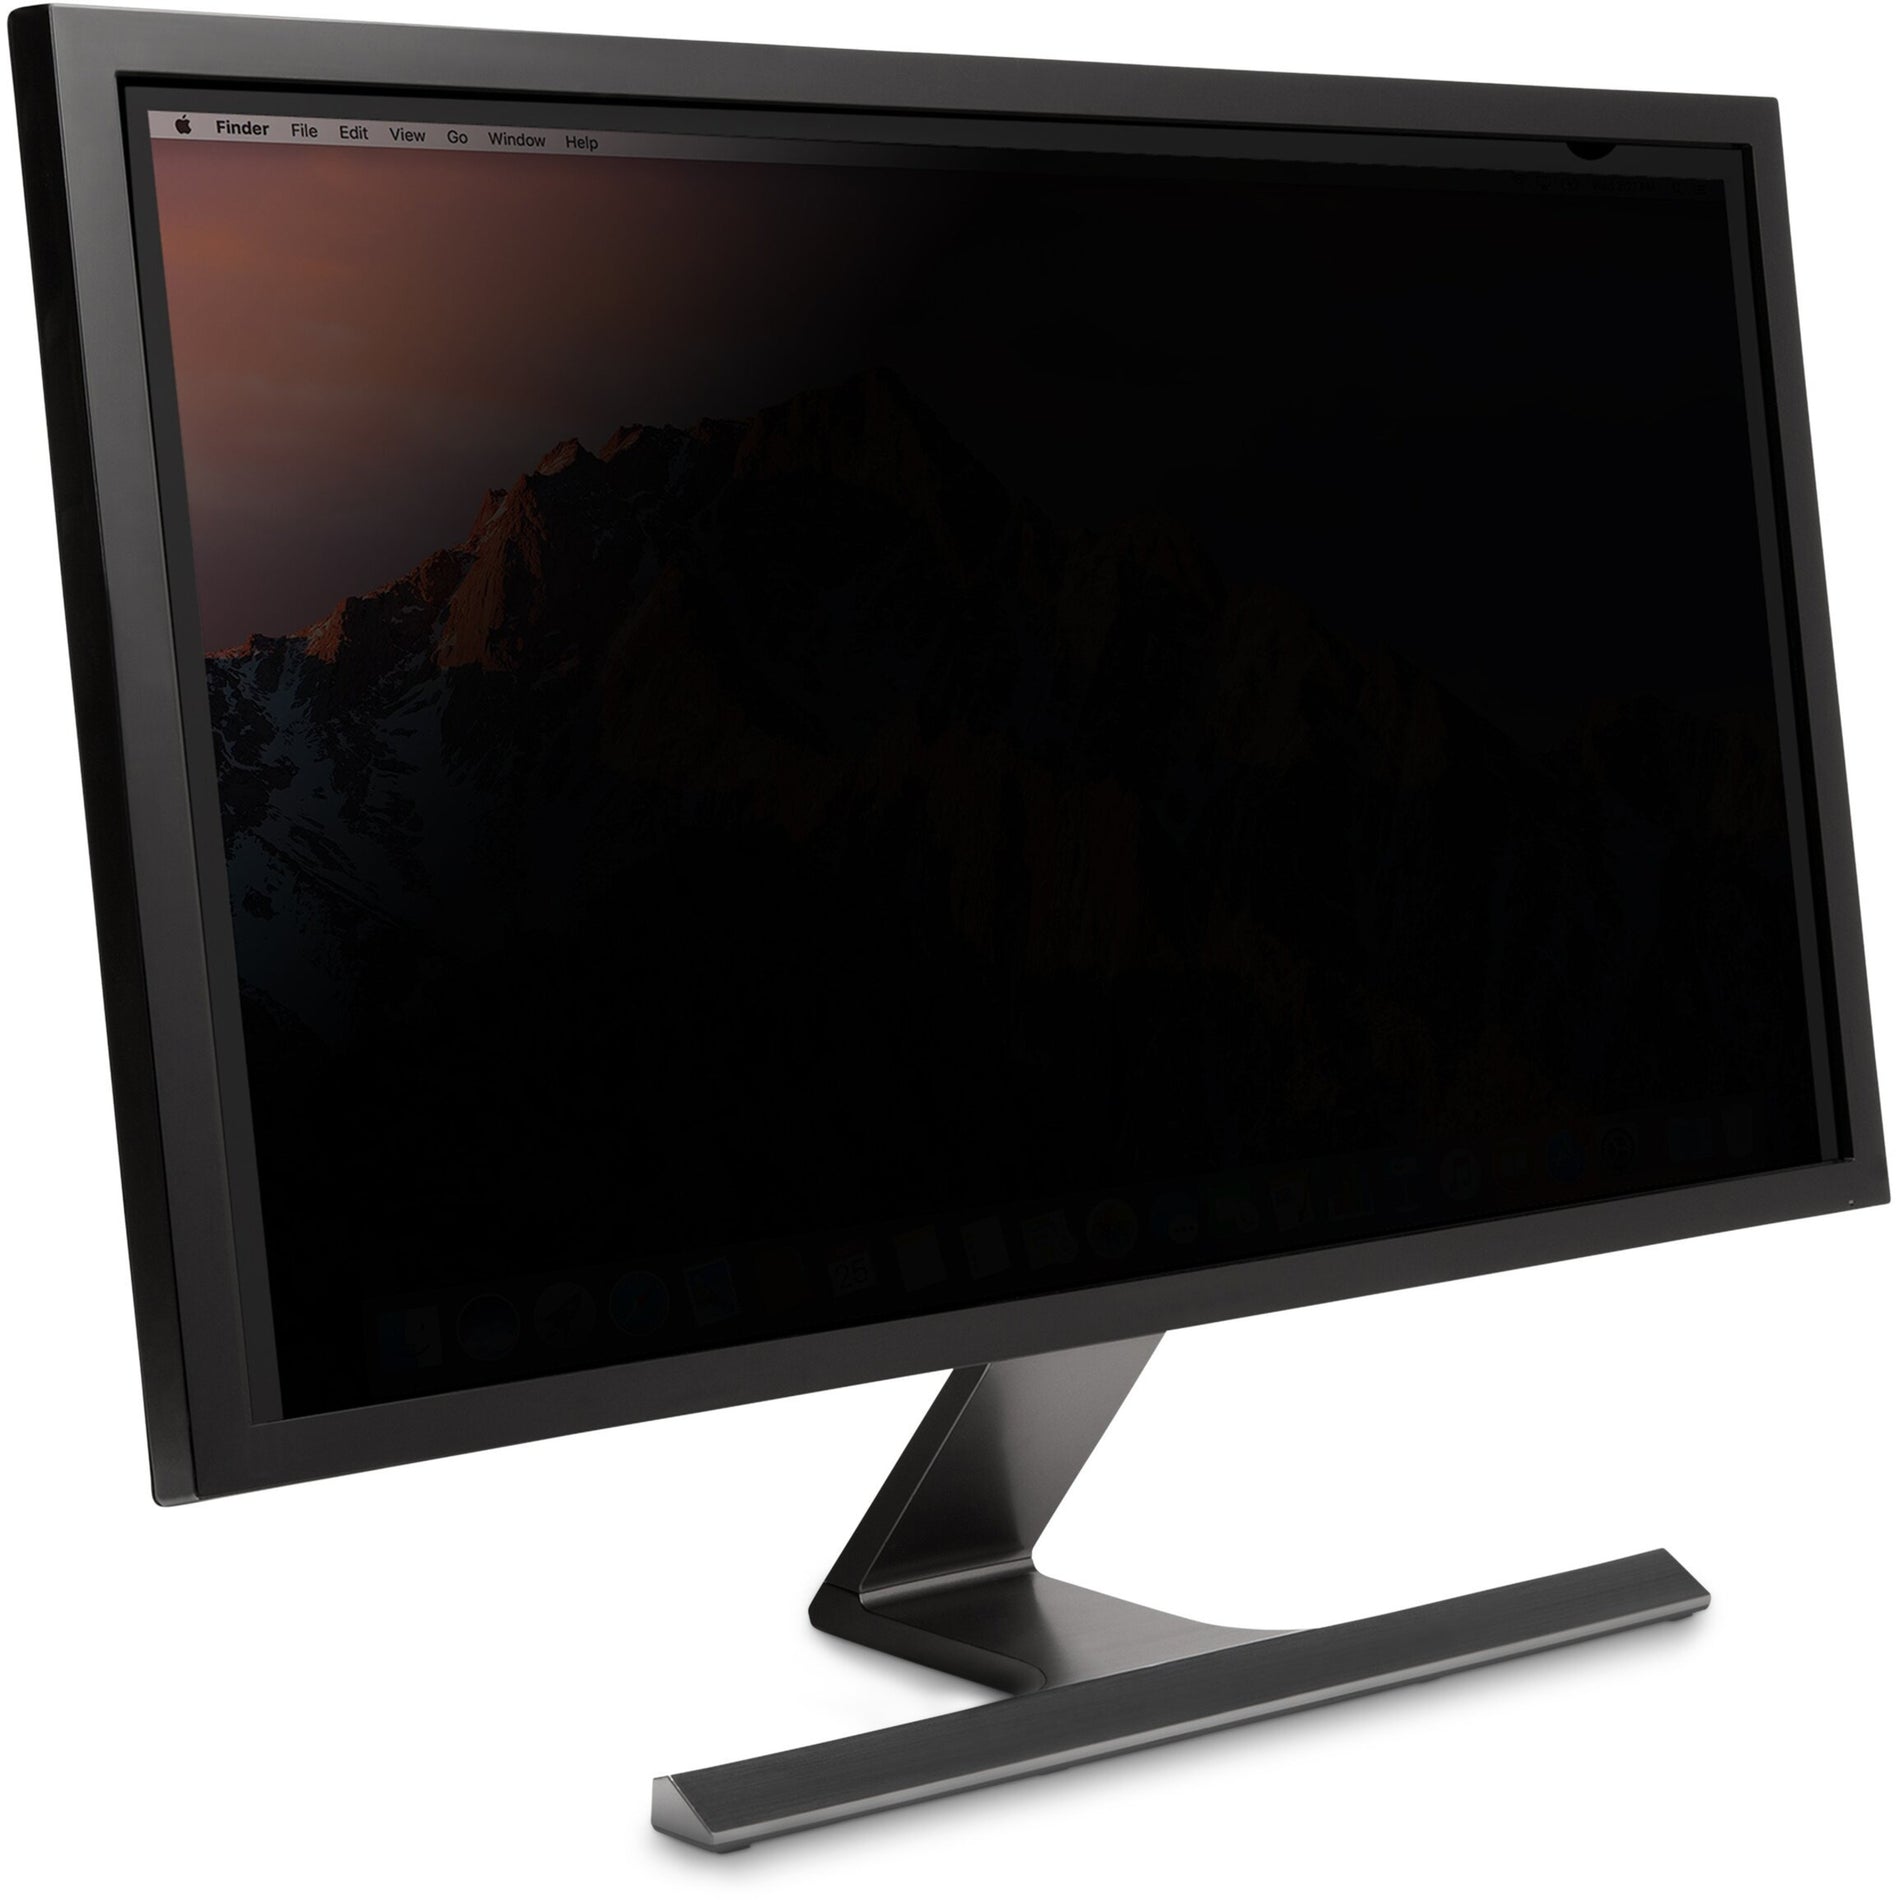 Kensington K60731WW FP238W9 Privacy Screen for 23.8" Widescreen Monitors (16:9), Anti-Reflective, Reversible Matte-to-Glossy, Blue Light Reduction